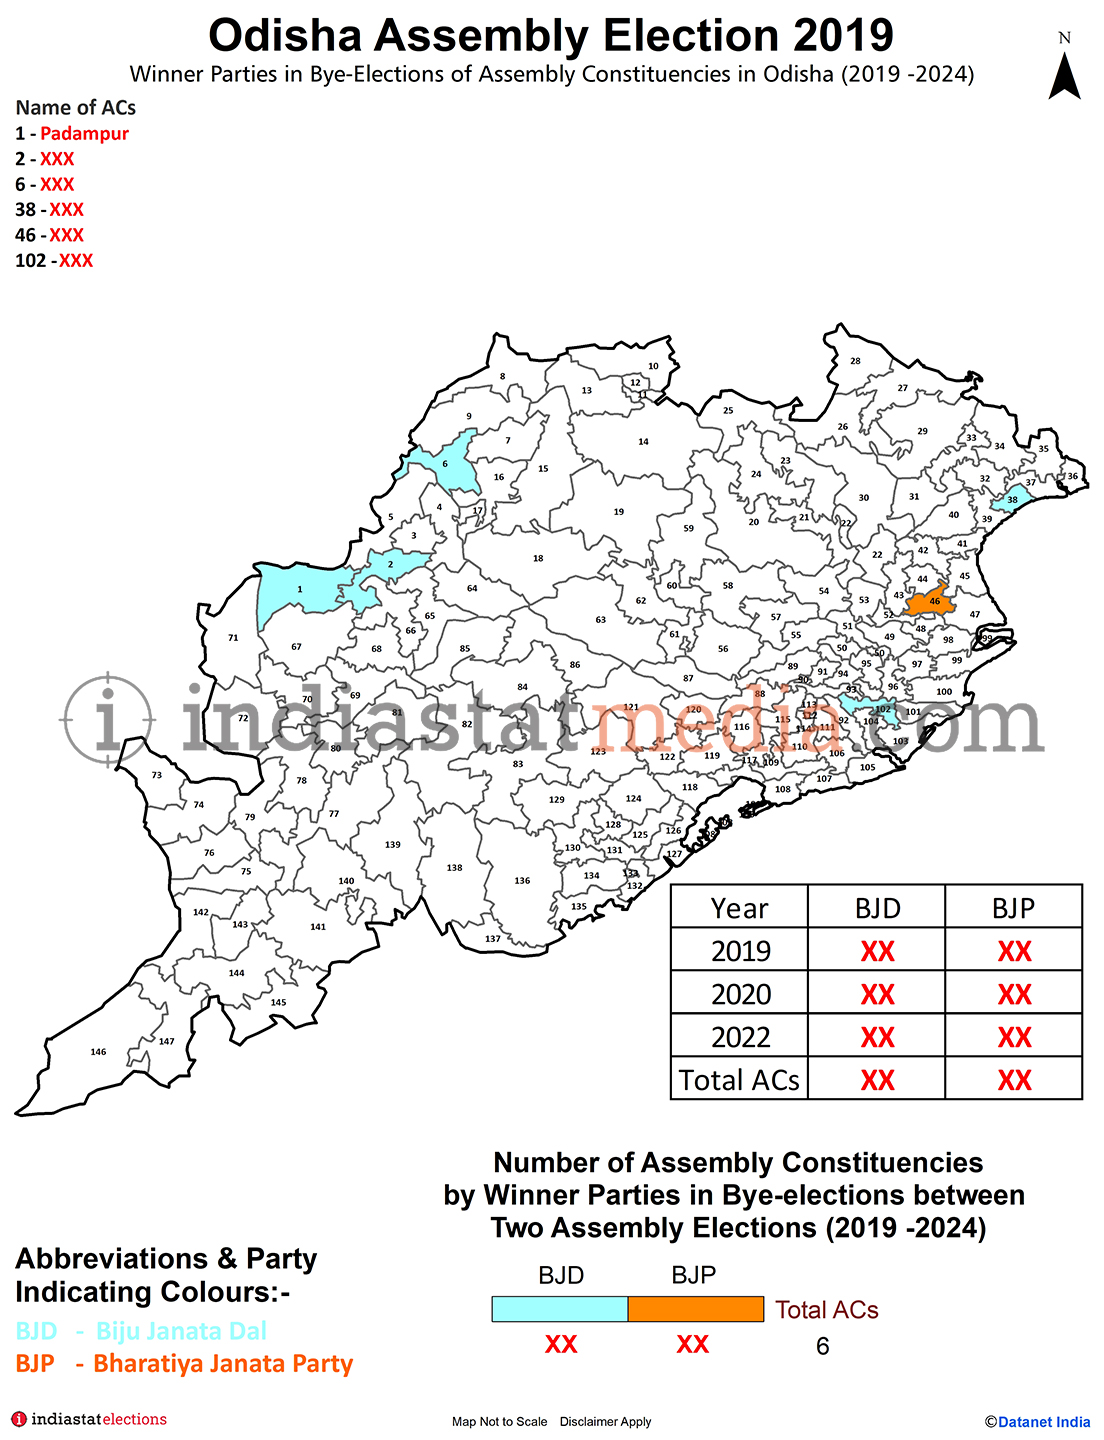 Winner Parties in Bye-elections between Two Assembly Elections in Odisha (2019 & 2024)